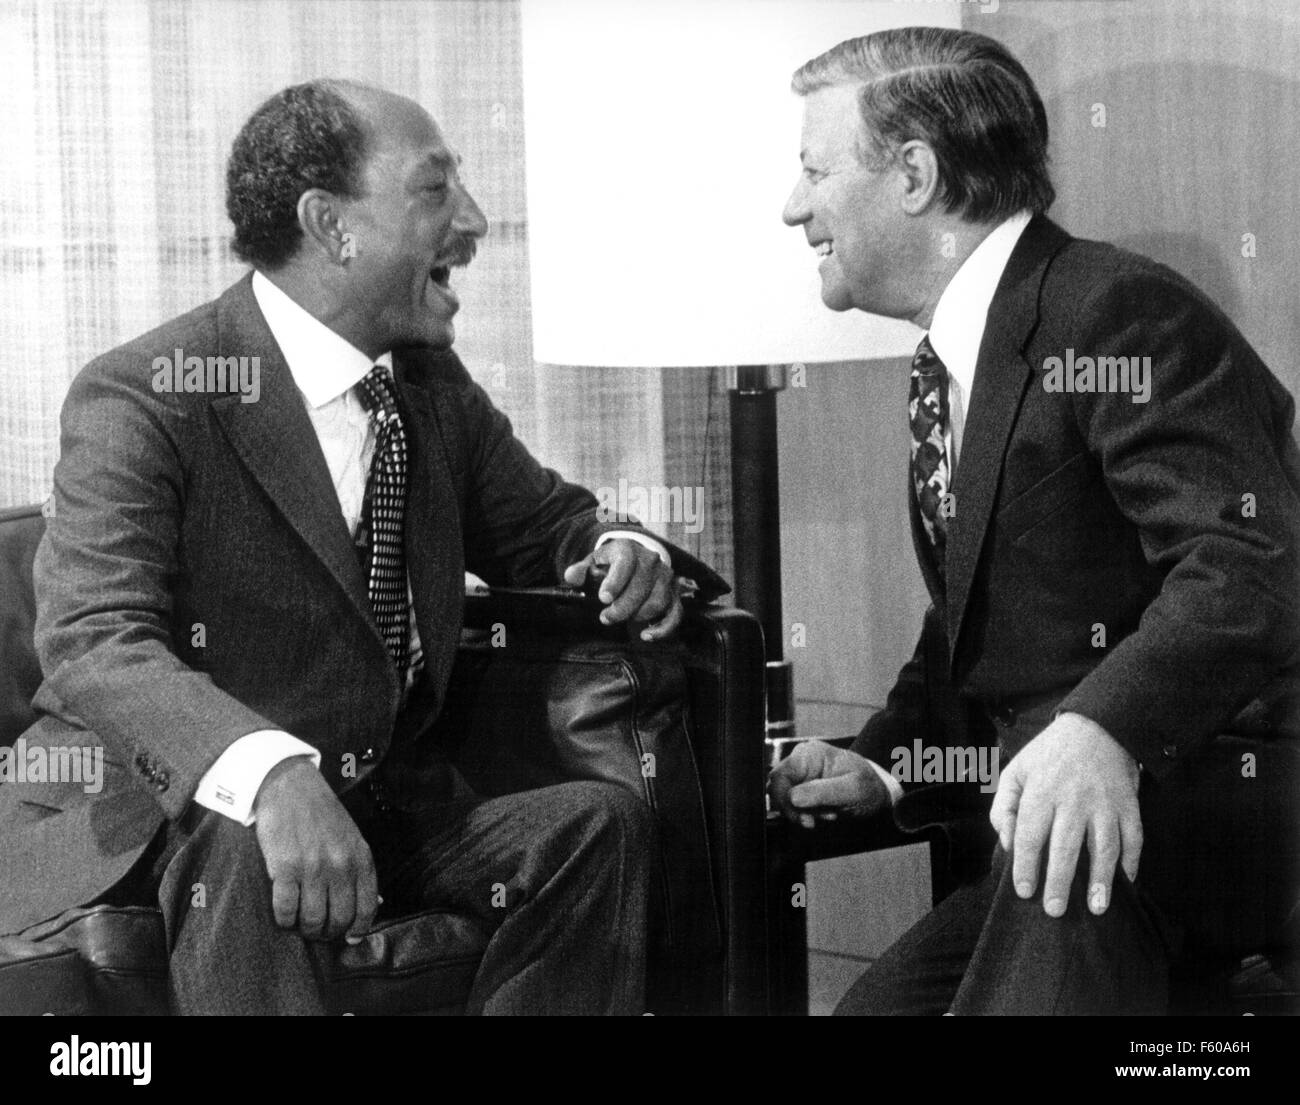 Egypt President Anwar el Sadat (l) was laughing together with German Chancellor Helmut Schmidt during their political talks on the second day of his visit in Bonn, on 1 April 1977. Stock Photo